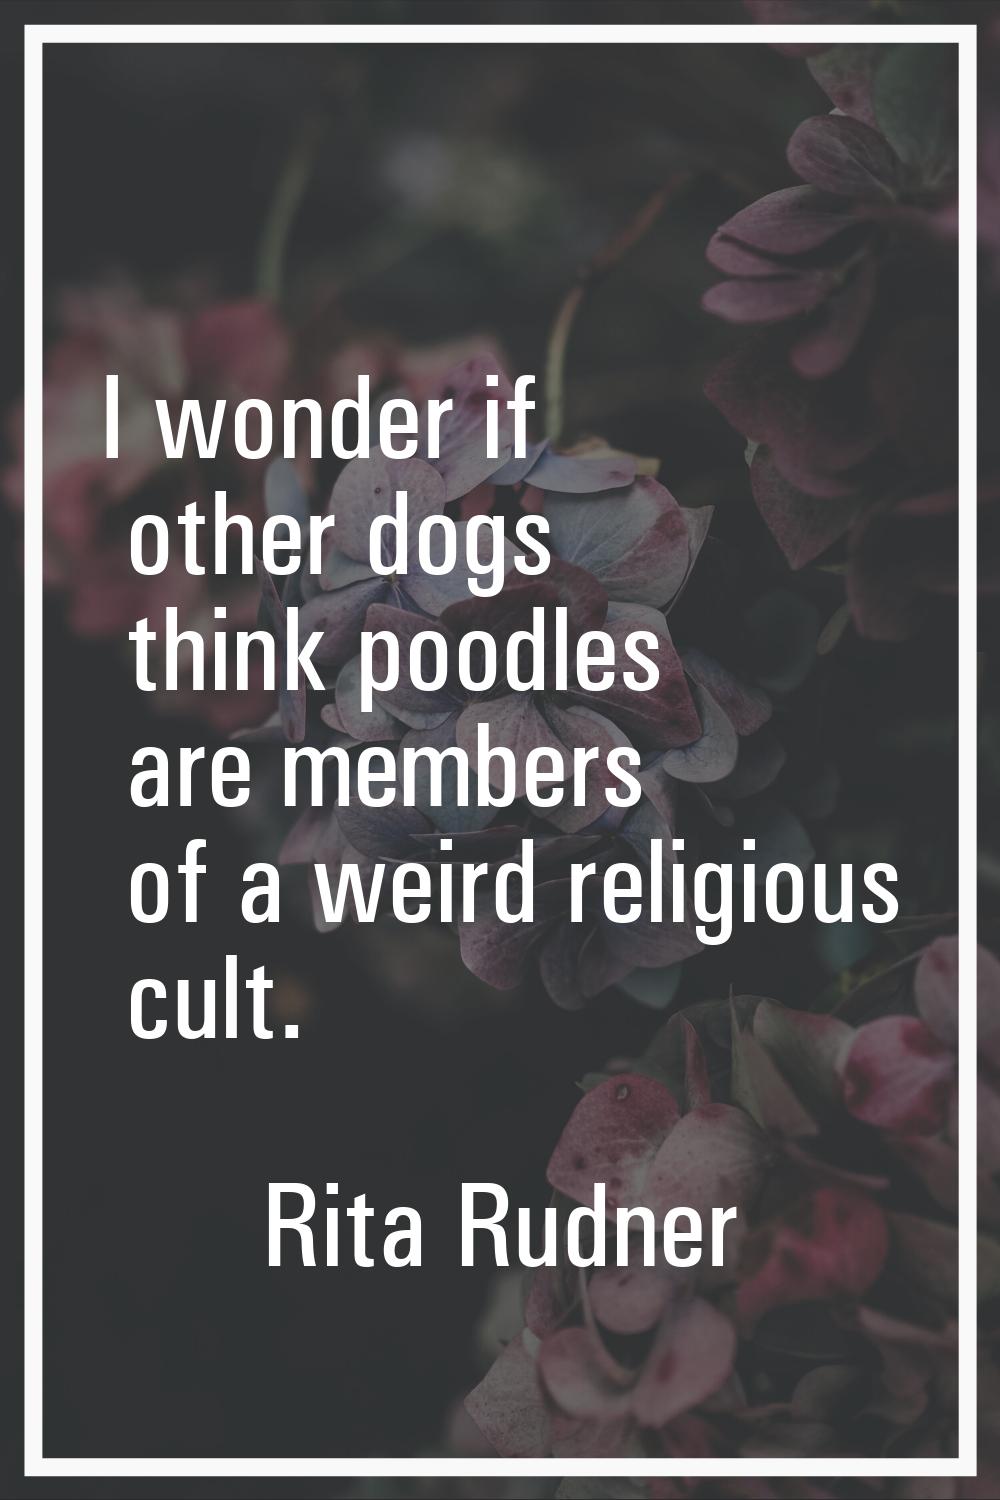 I wonder if other dogs think poodles are members of a weird religious cult.